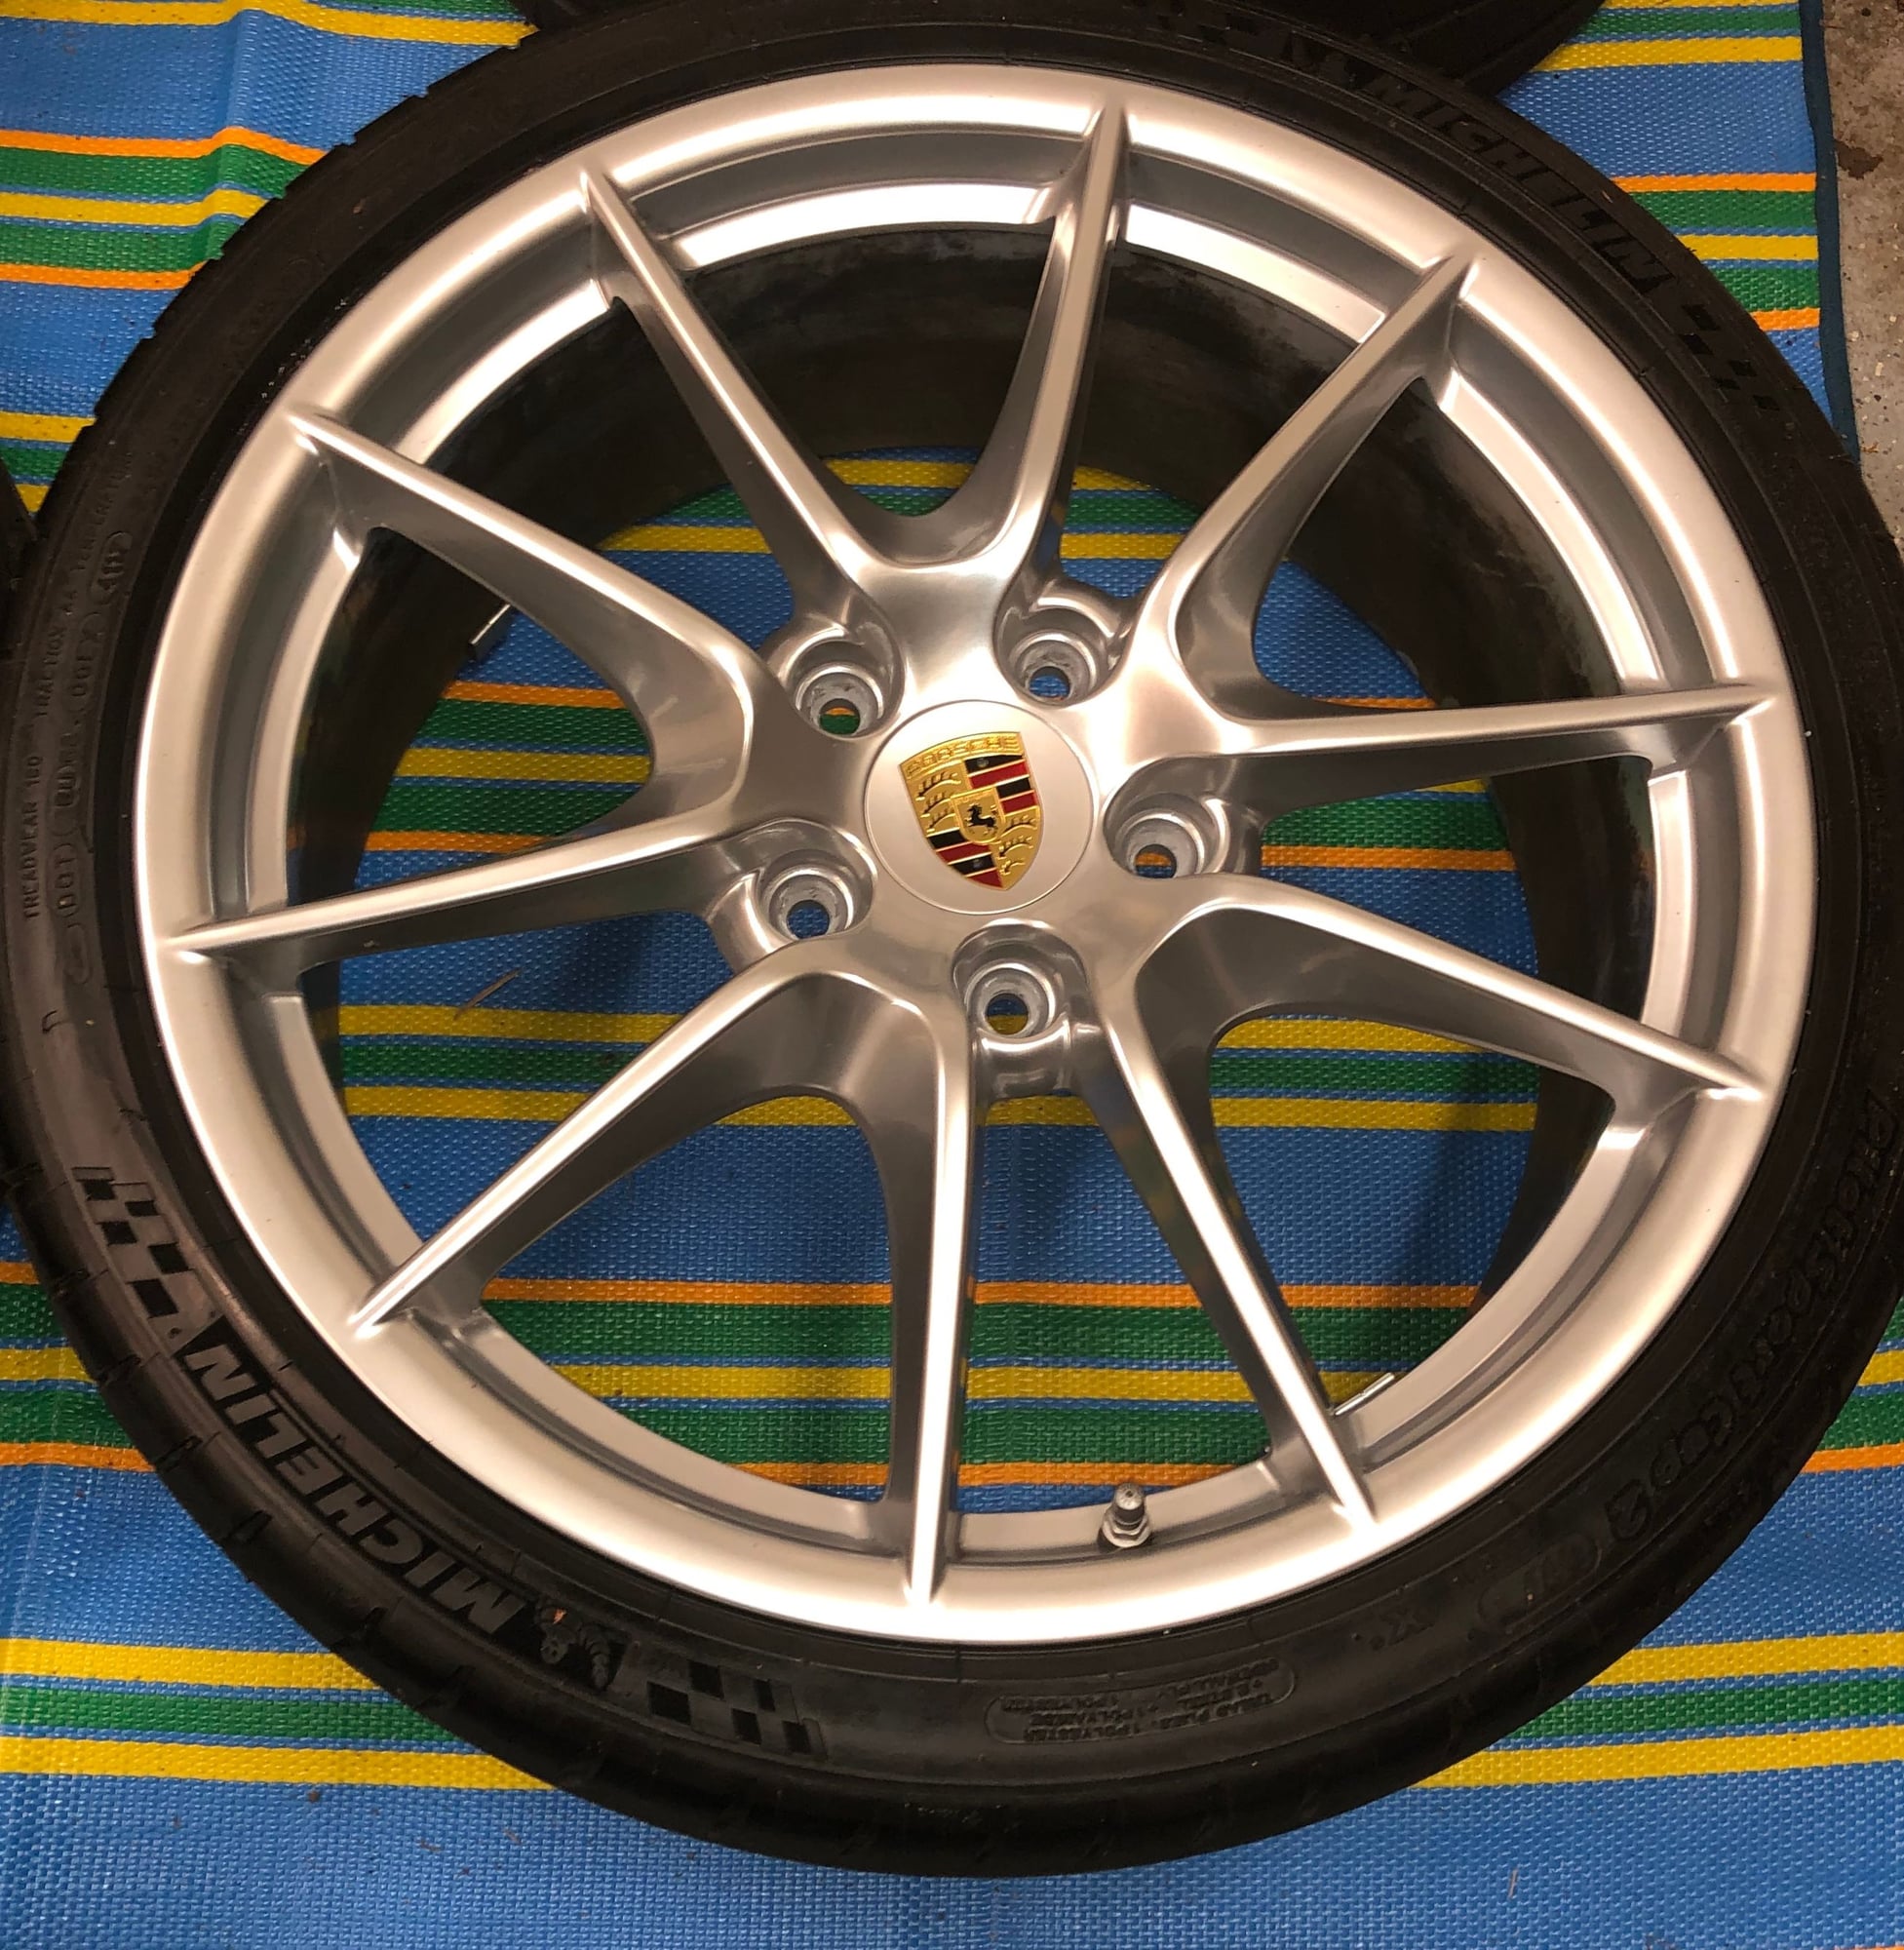 Wheels and Tires/Axles - OEM Carrera S Wheel Tire Set 20" Narrow Body 991 Michelin Pilot Sport Cup 2 like new - Used - 2012 to 2019 Porsche 911 - Weston, MA 02493, United States